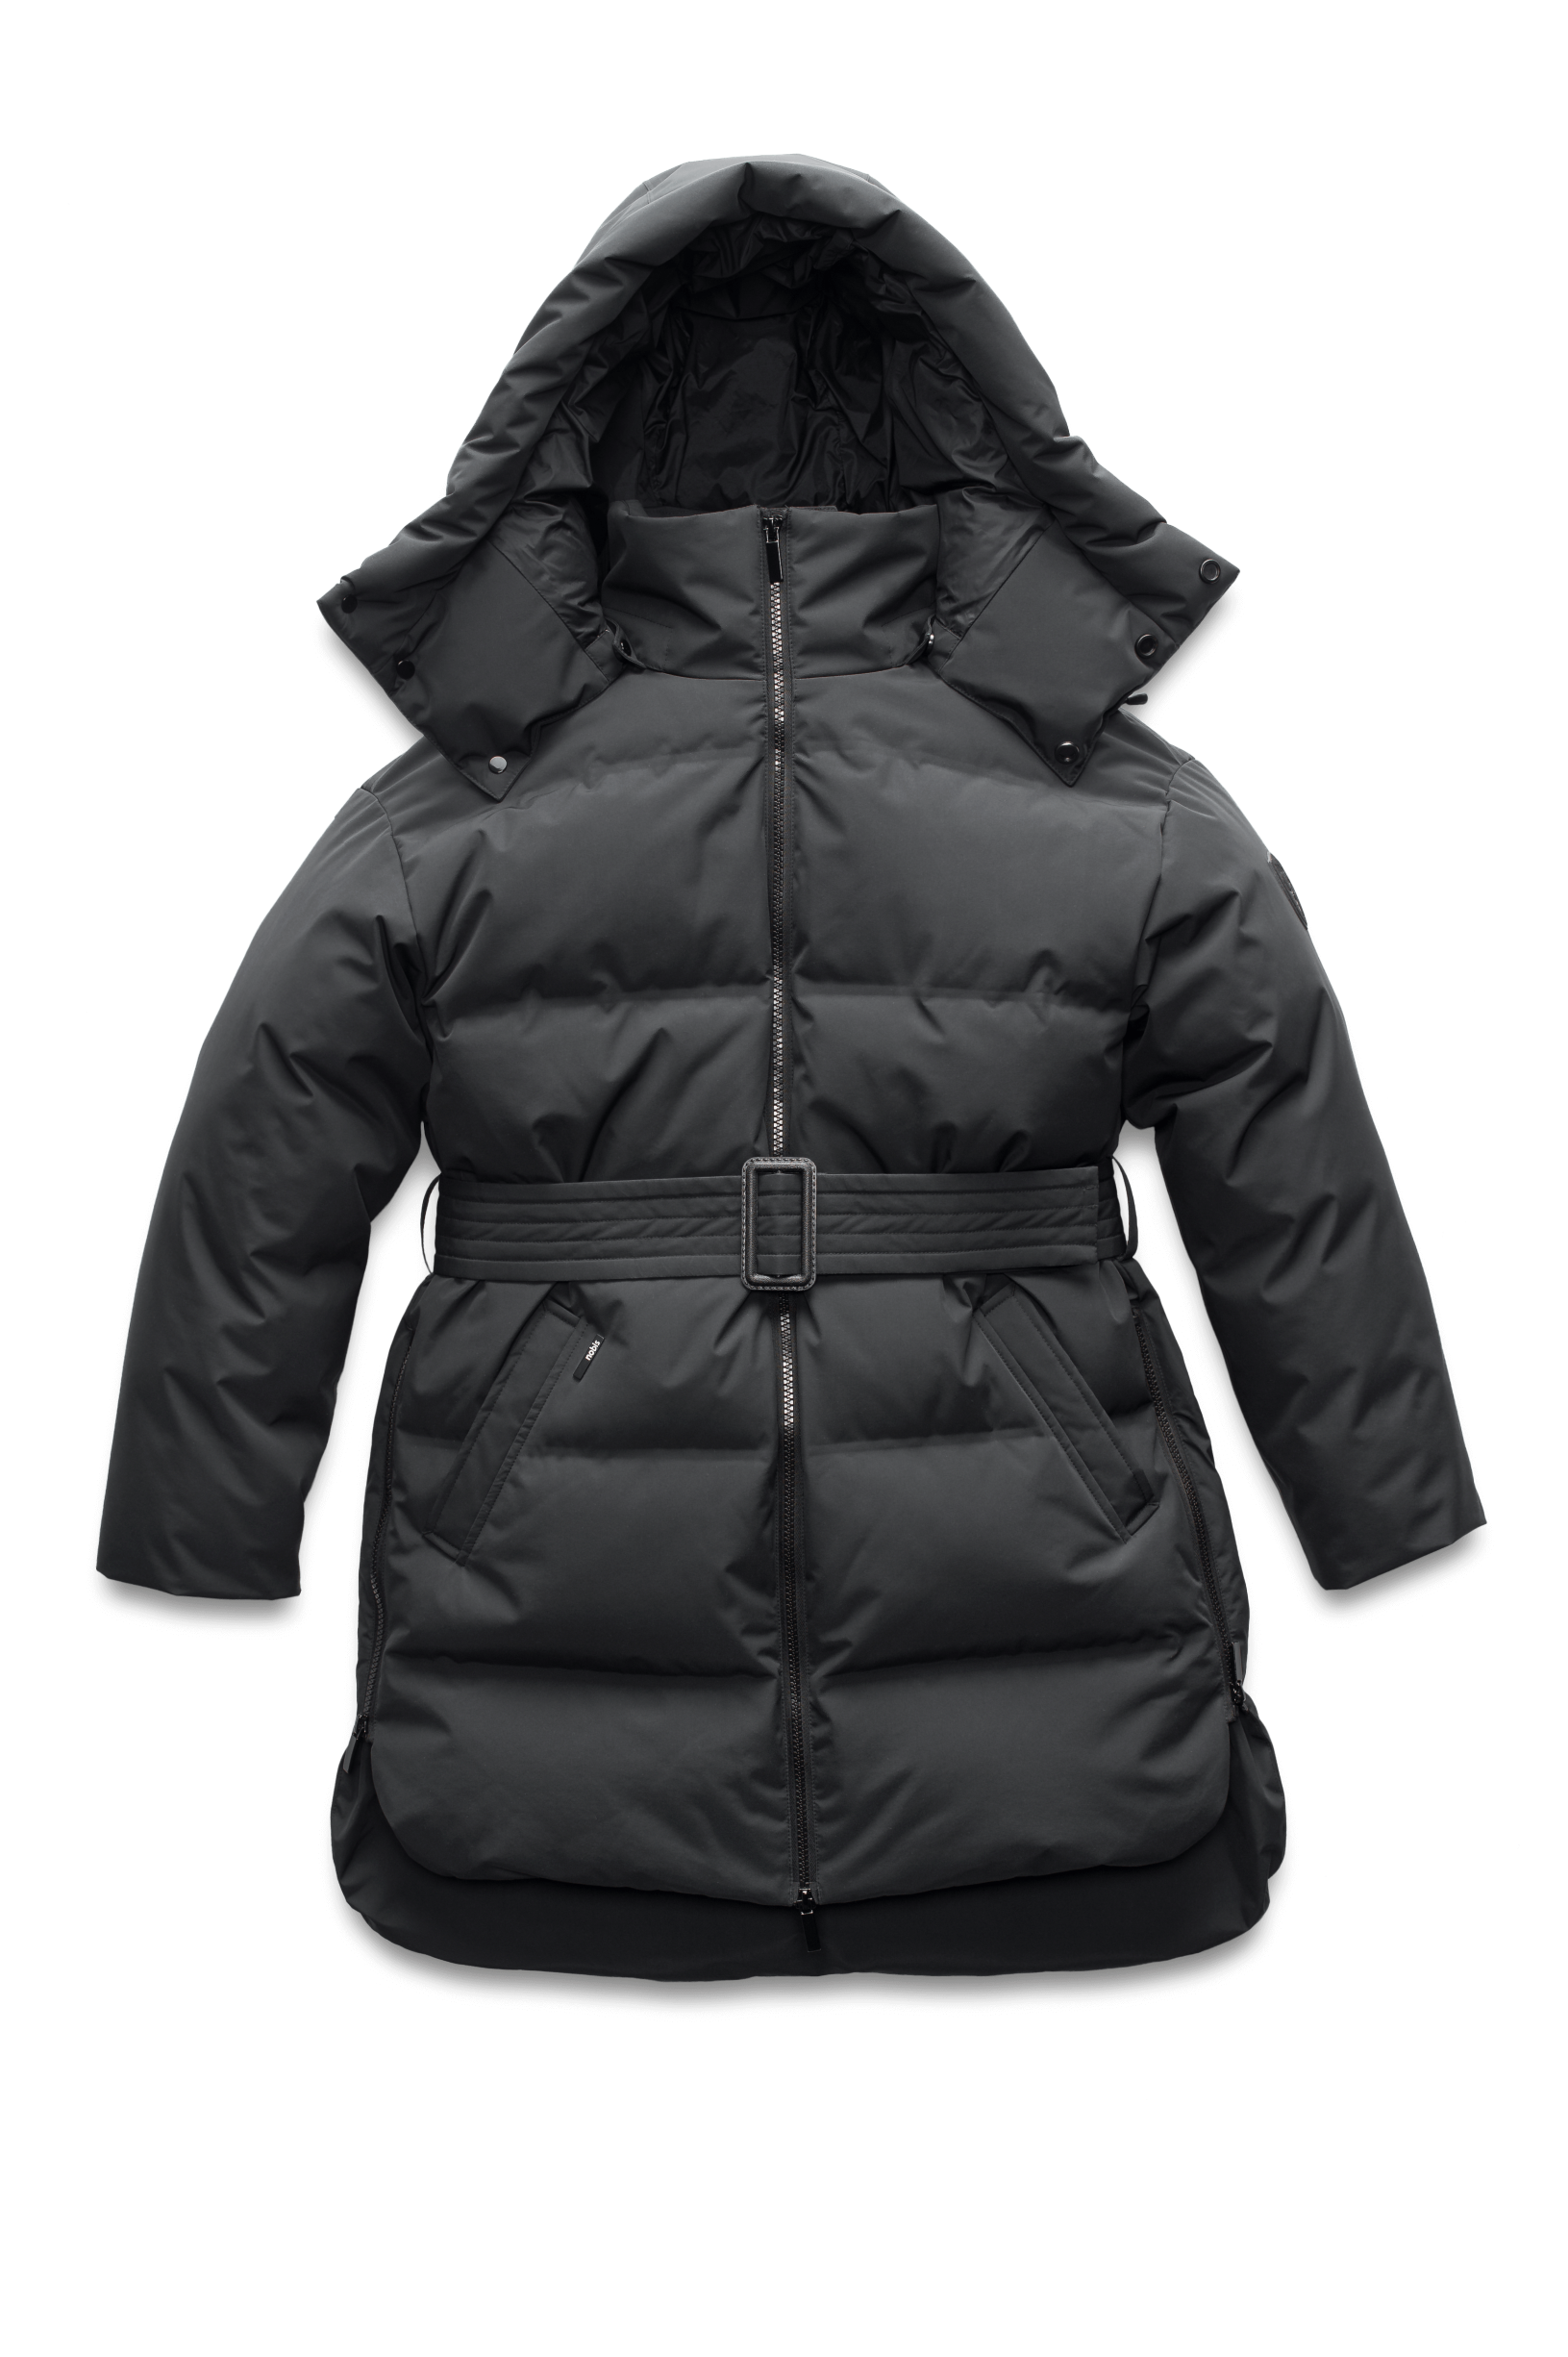 Women's thigh length down parka with removable hood and adjustable belt in Black